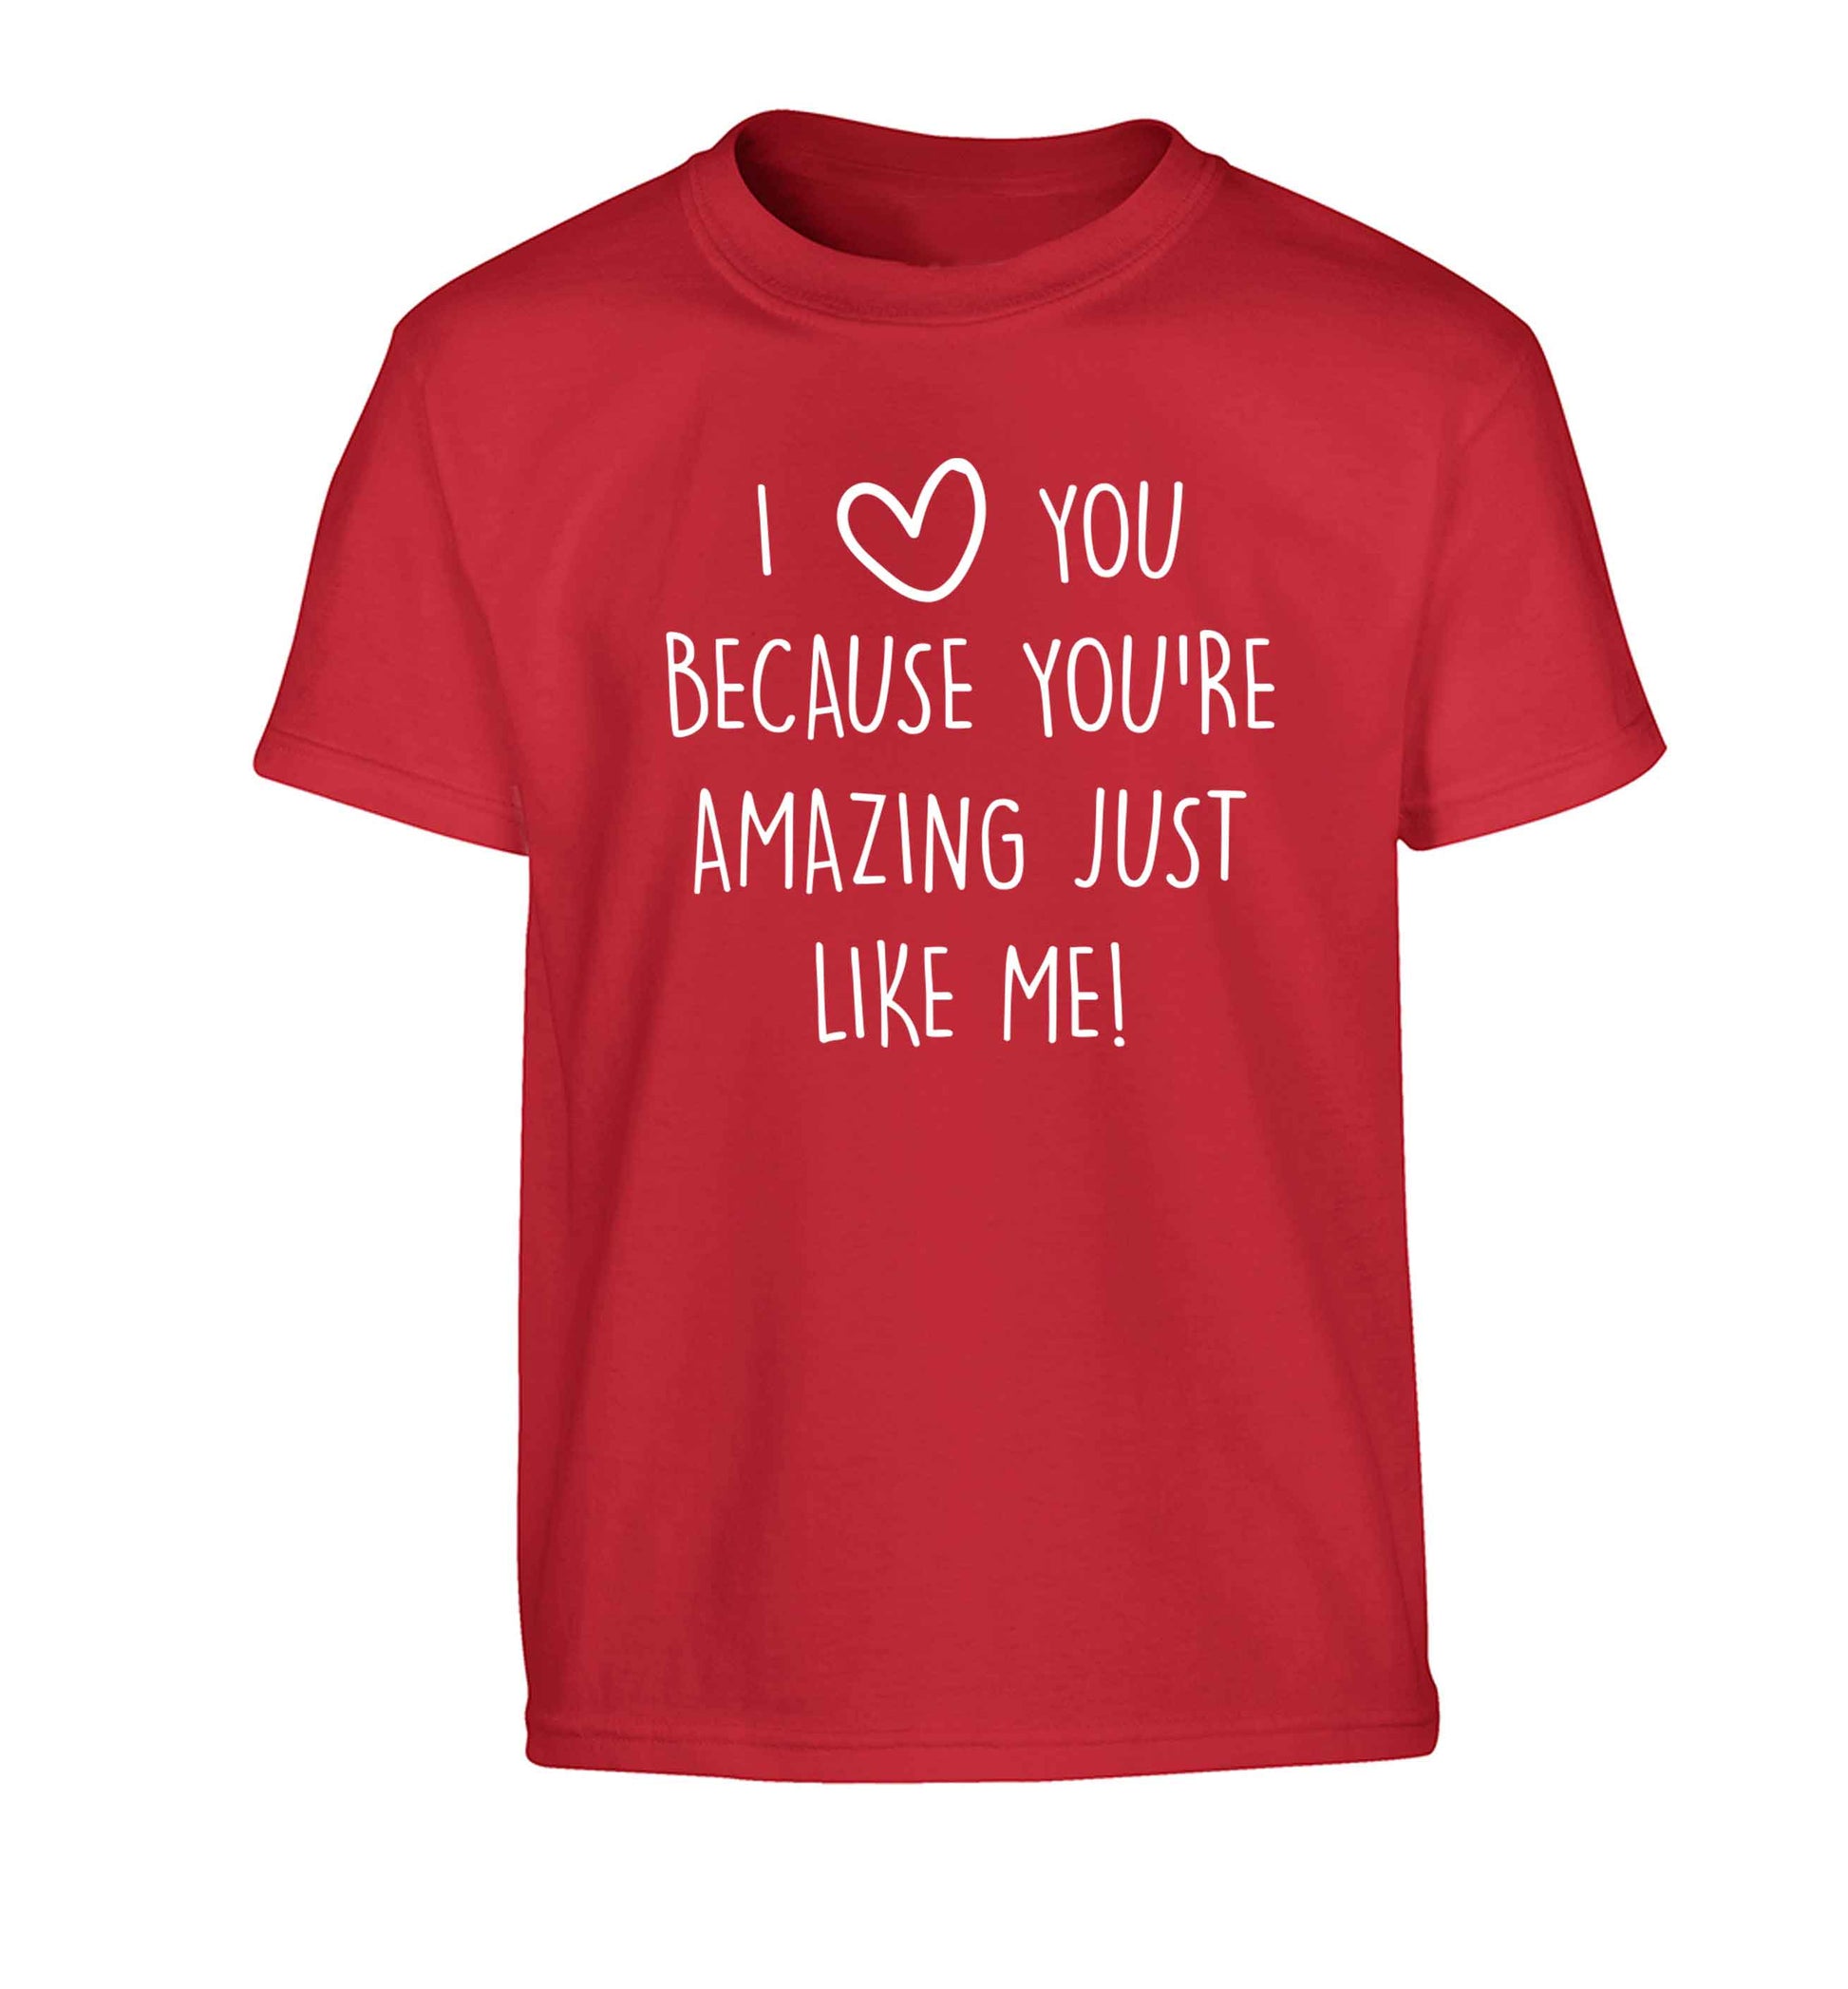 I love you because you're amazing just like me Children's red Tshirt 12-13 Years